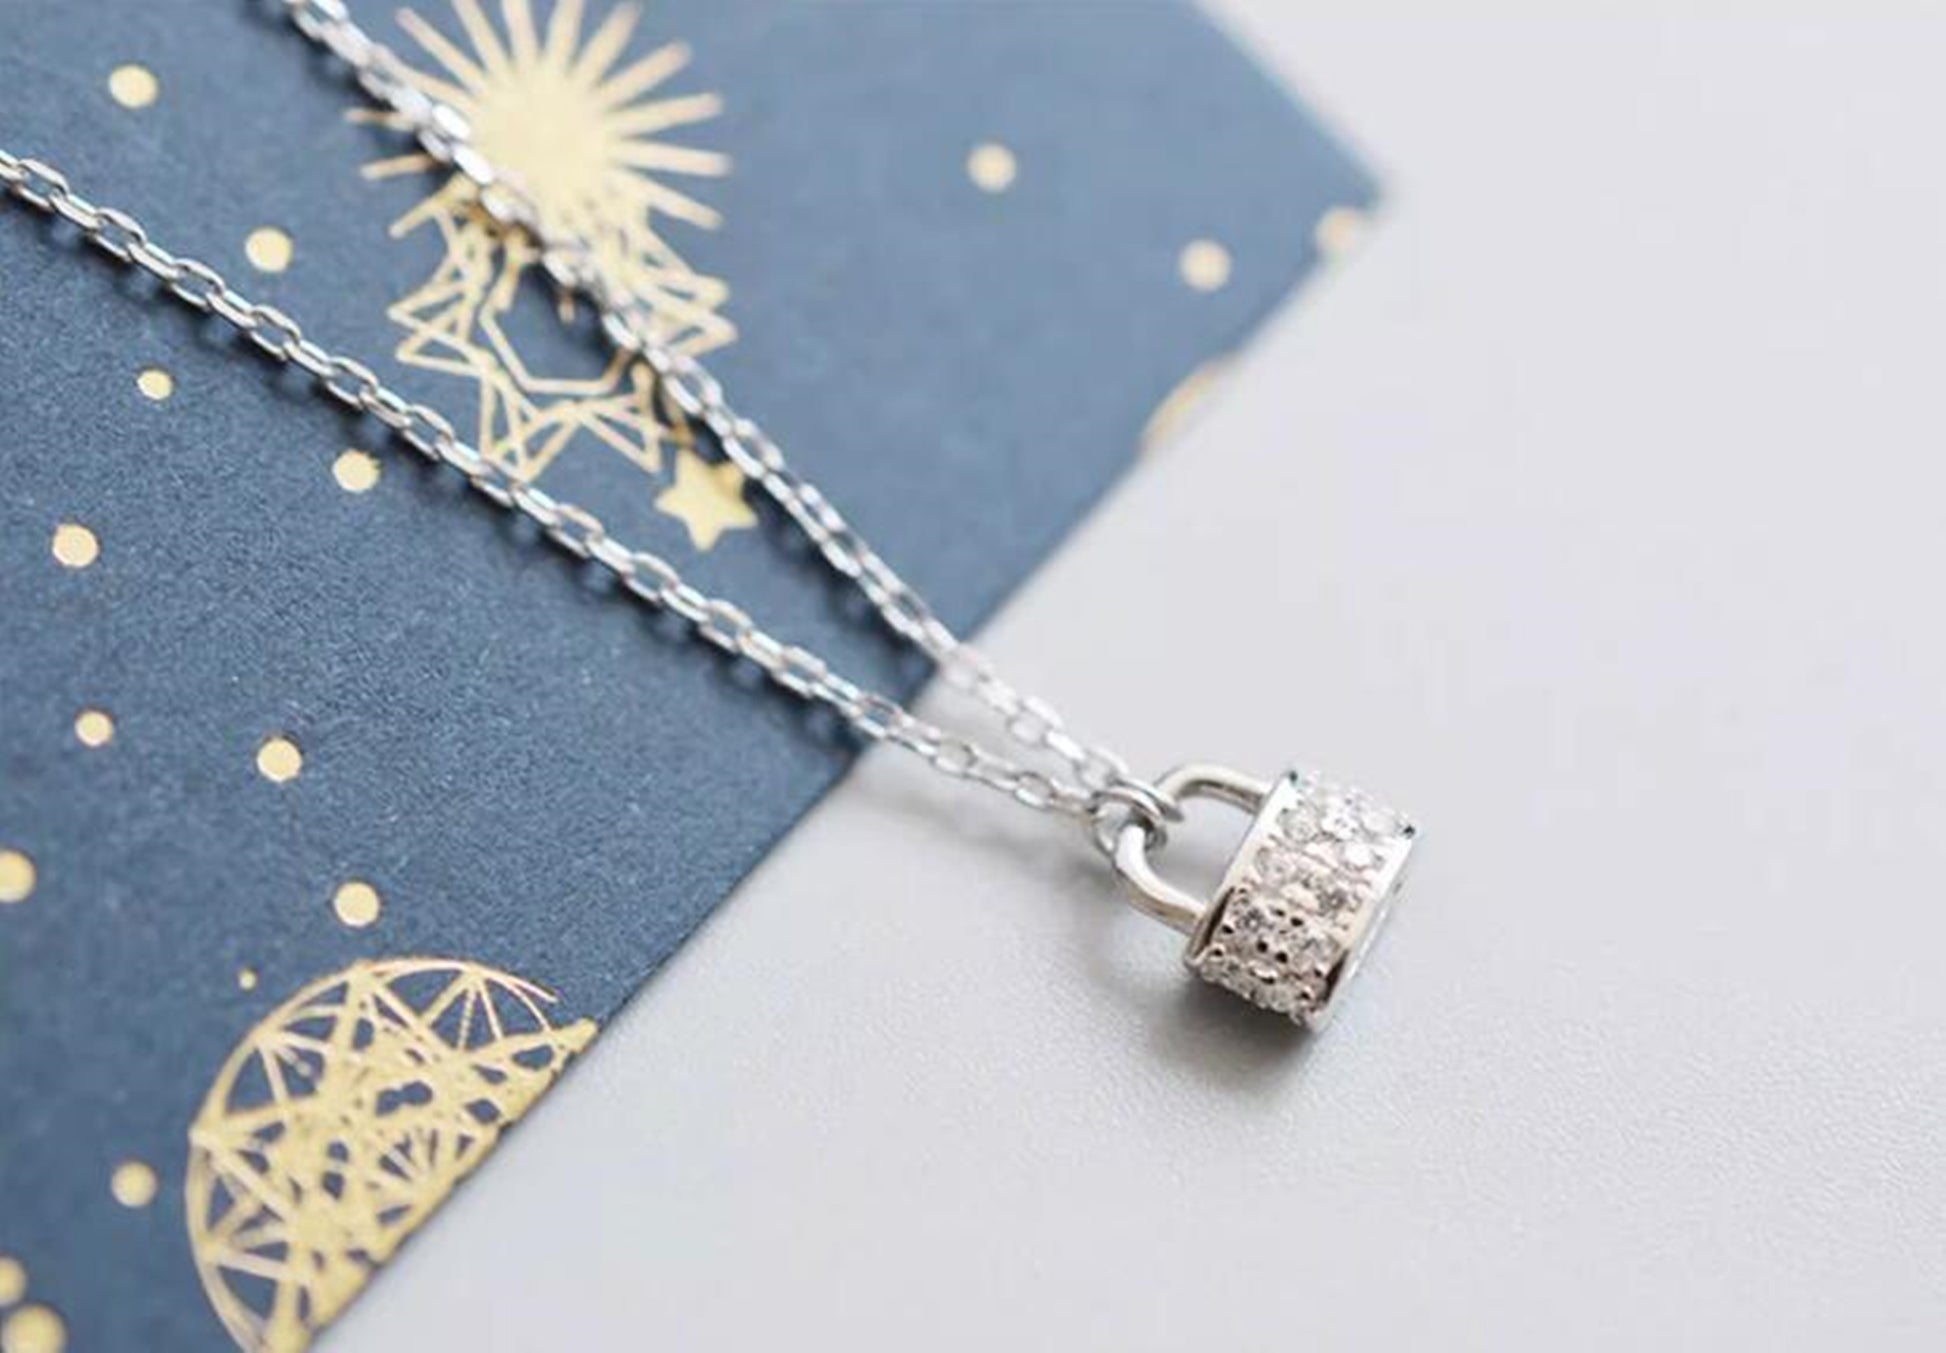 Sterling Silver Padlock Charm Pendant Necklace with Cubic Zirconia - sugarkittenlondon